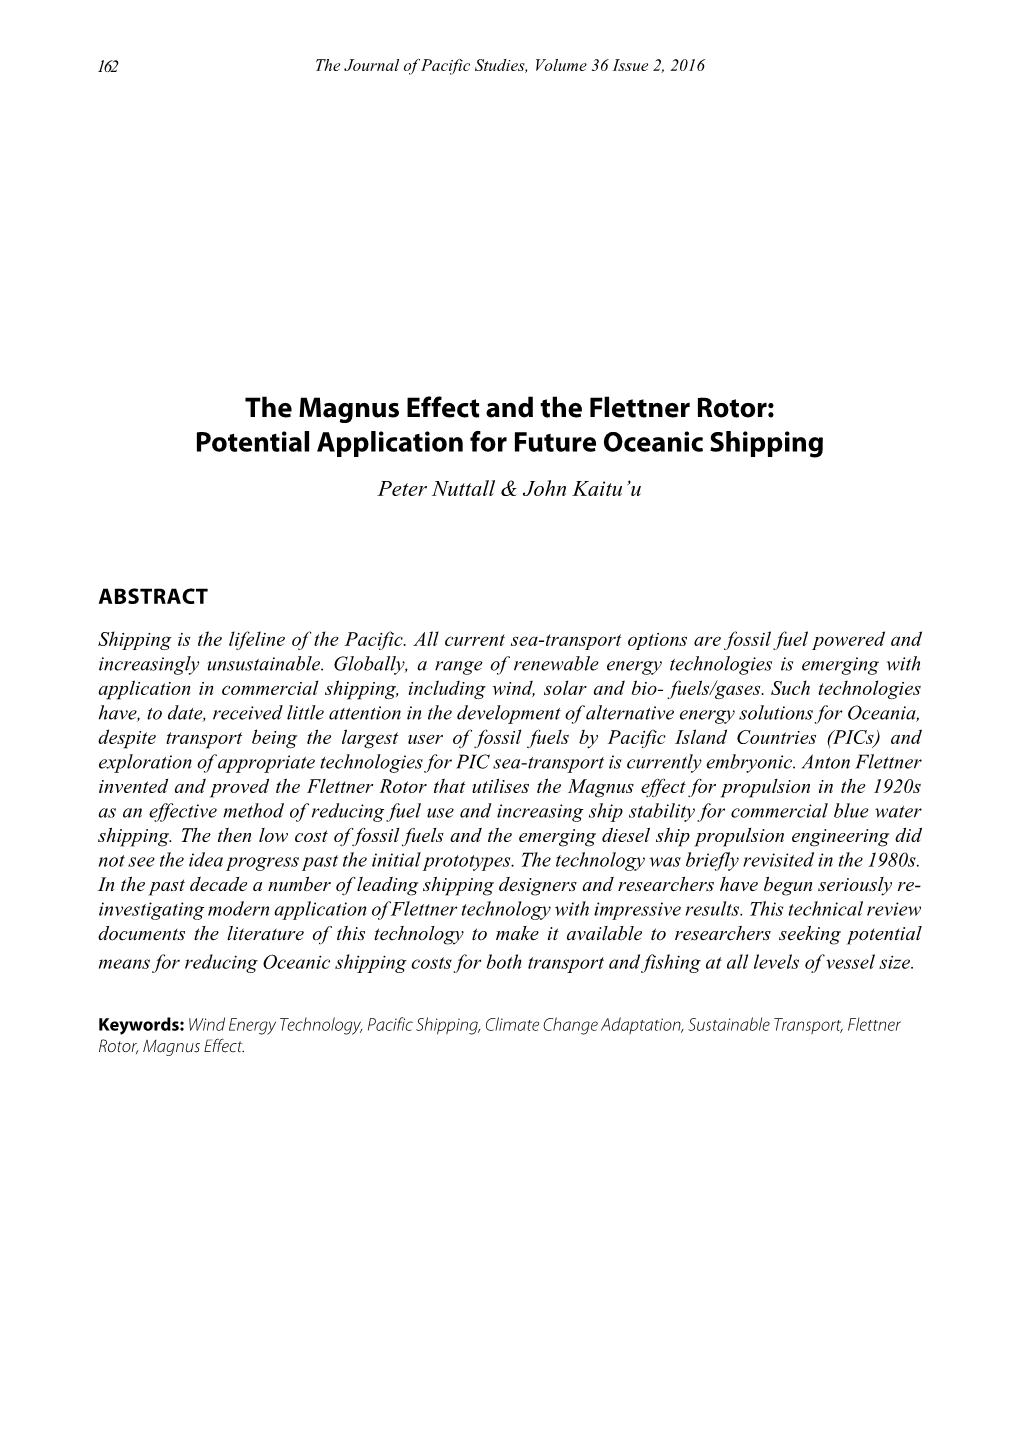 The Magnus Effect and the Flettner Rotor: Potential Application for Future Oceanic Shipping Peter Nuttall & John Kaitu’U